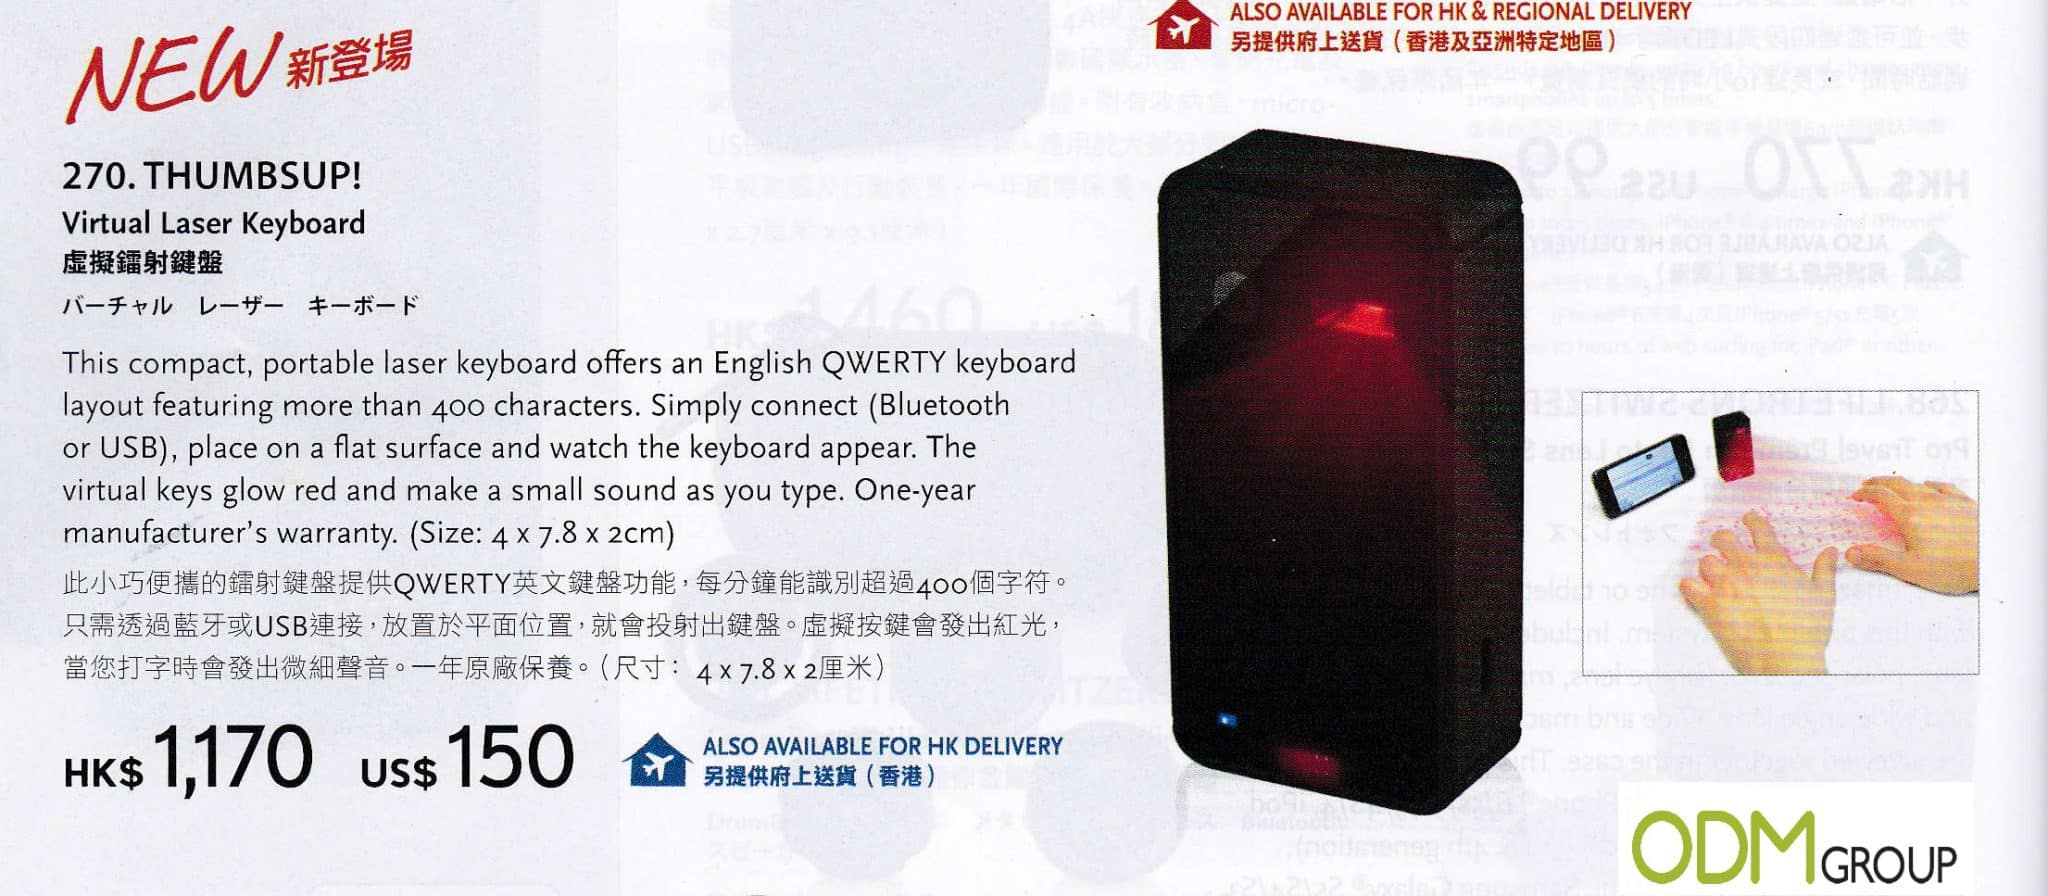 Cathay Pacific: Virtual Laser Keyboard as a High End Gift